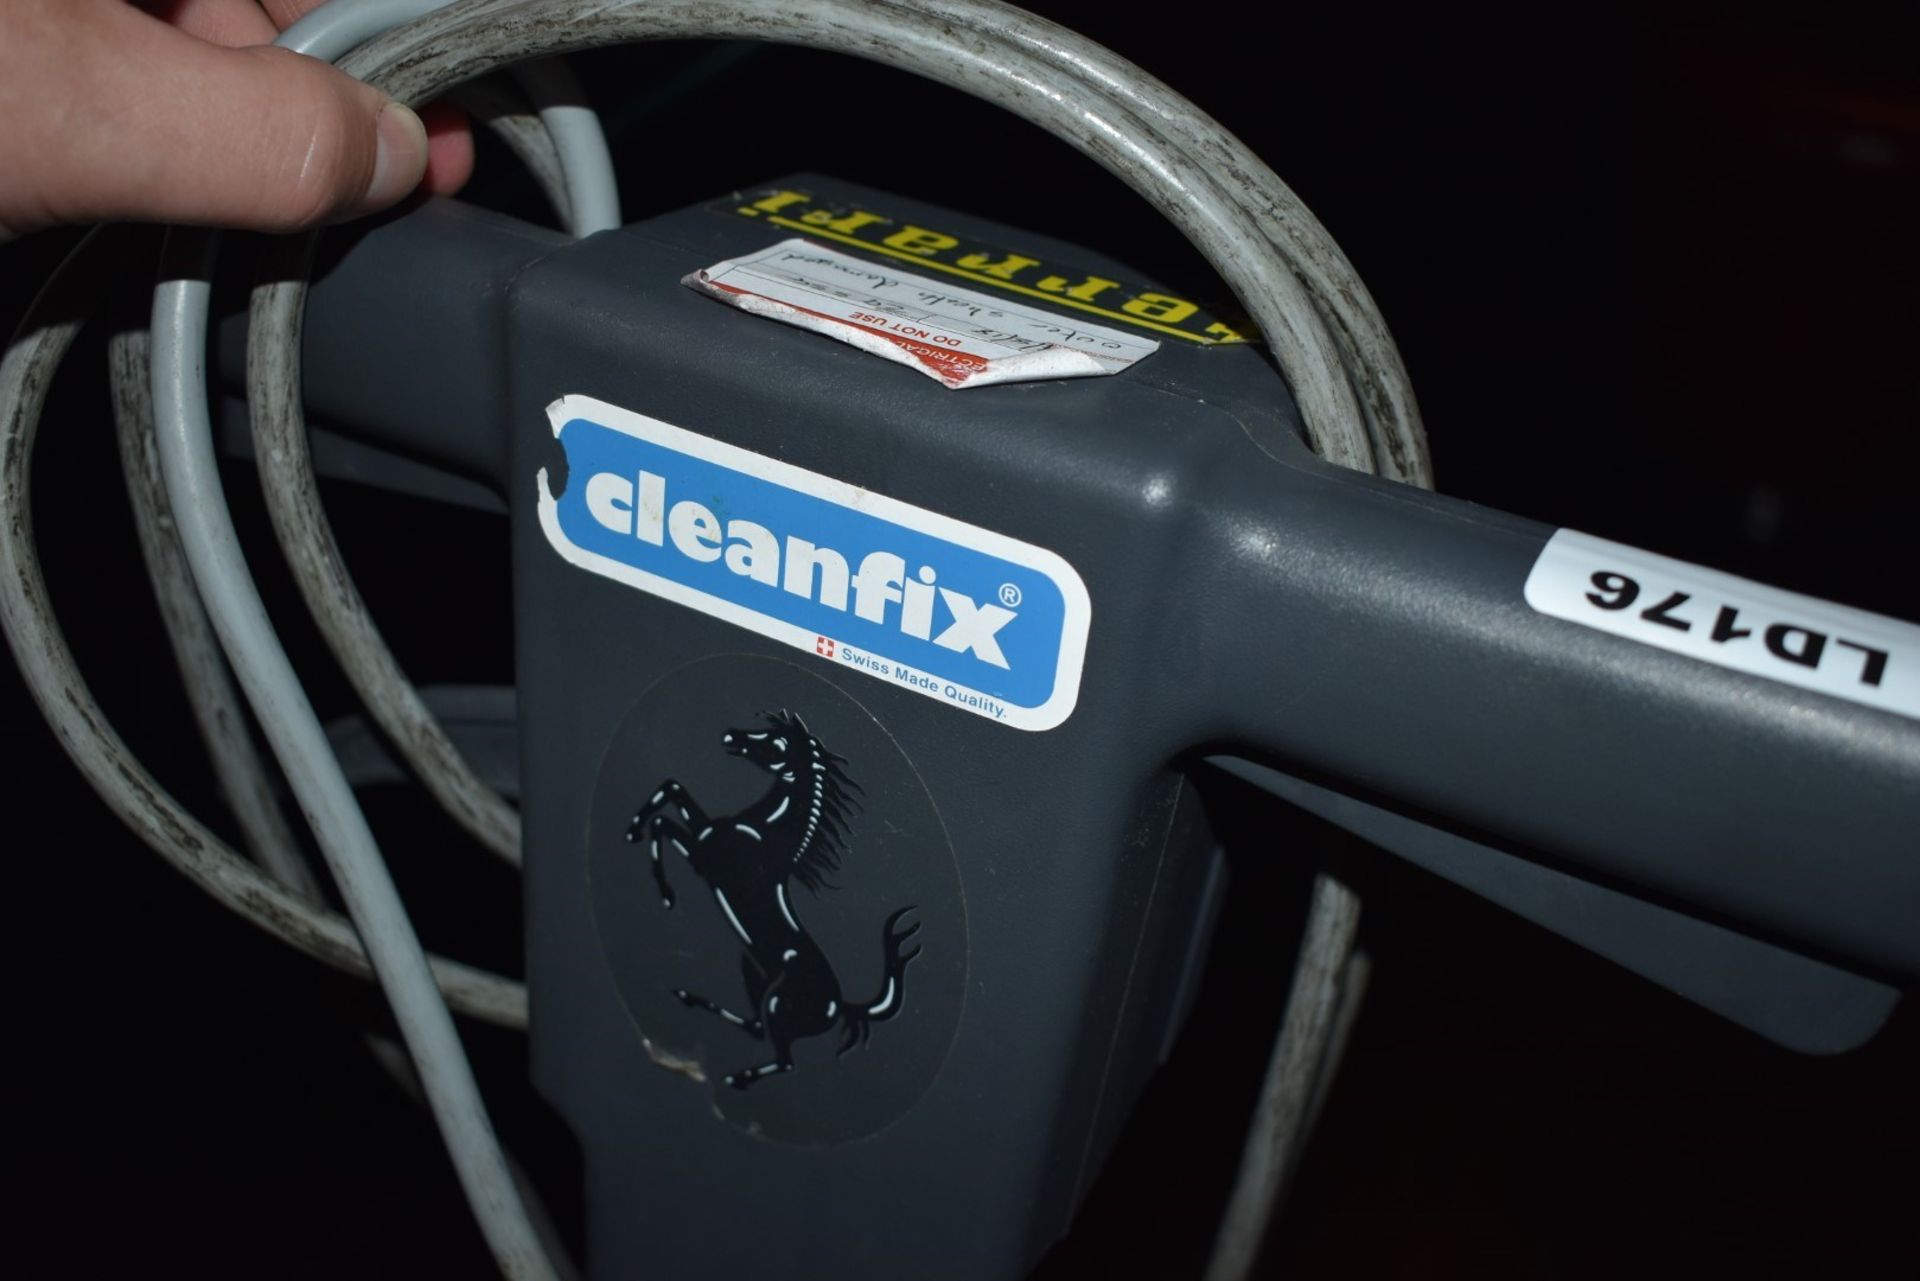 1 x Cleanfix 'POWER DISC 165' Commercial Floor Cleaner - Swiss Made - CL392 - Ref LD176 - - Image 2 of 4